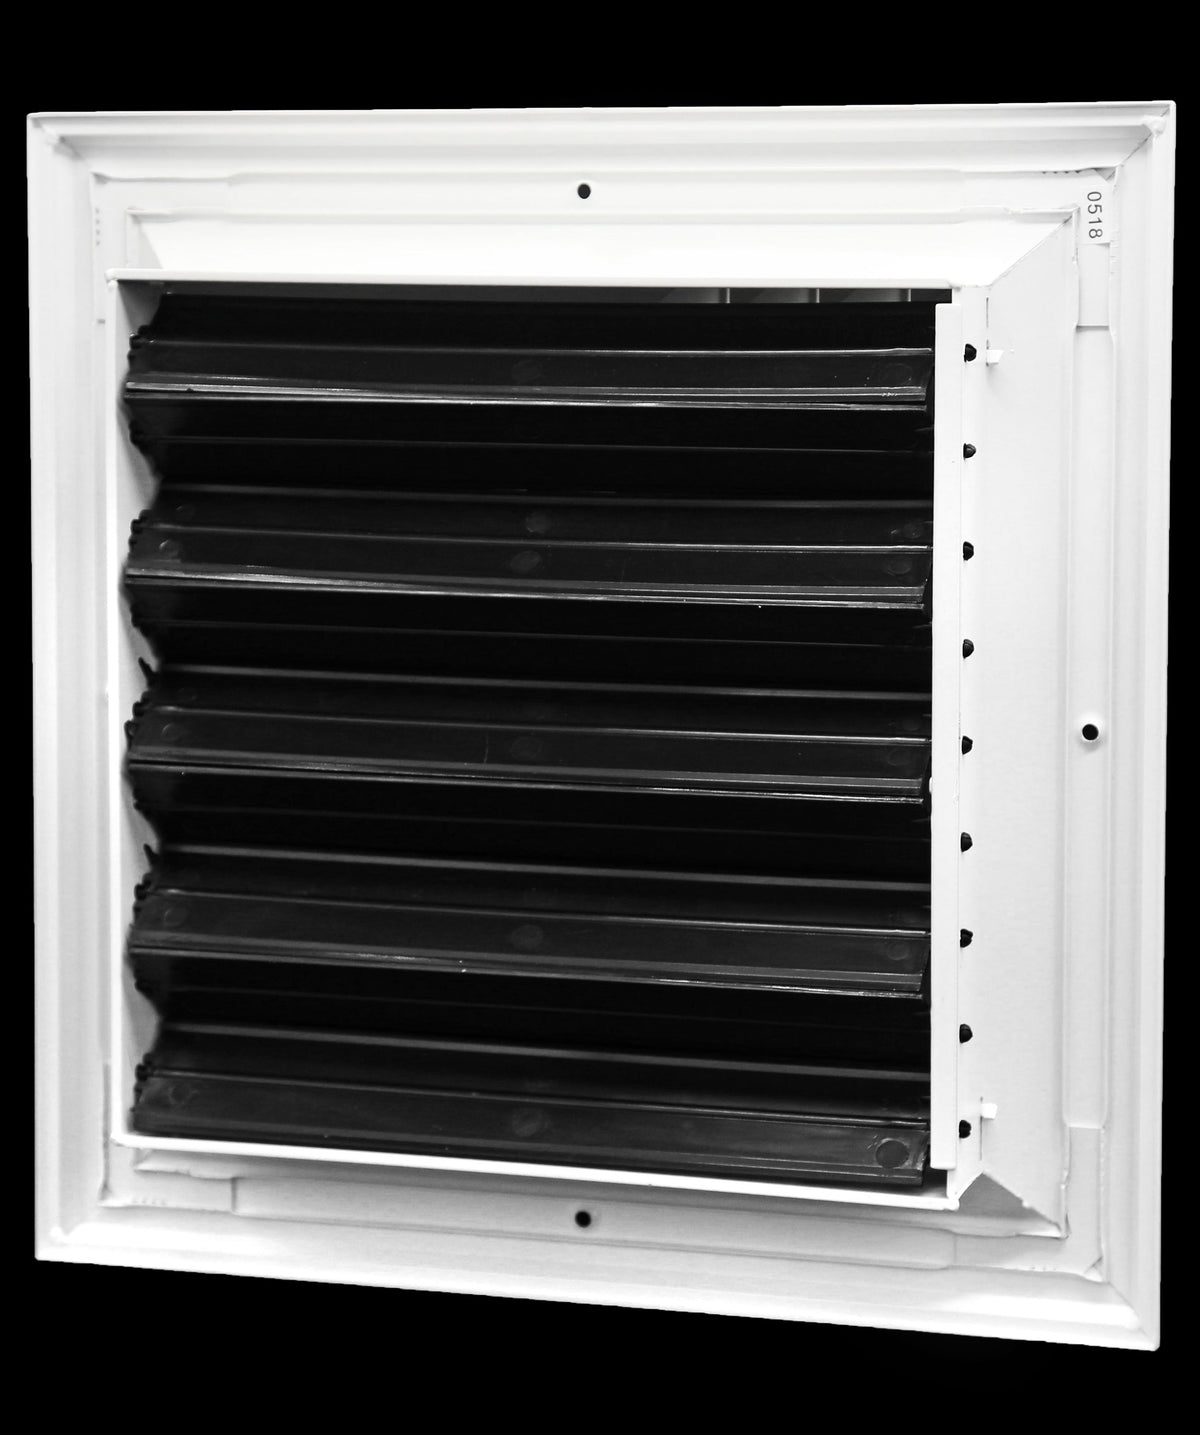 6&quot; x 6&quot; 3-WAY SUPPLY GRILLE - DUCT COVER &amp; DIFFUSER - LOW NOISE - For Ceiling - With Opposing Damper Blades